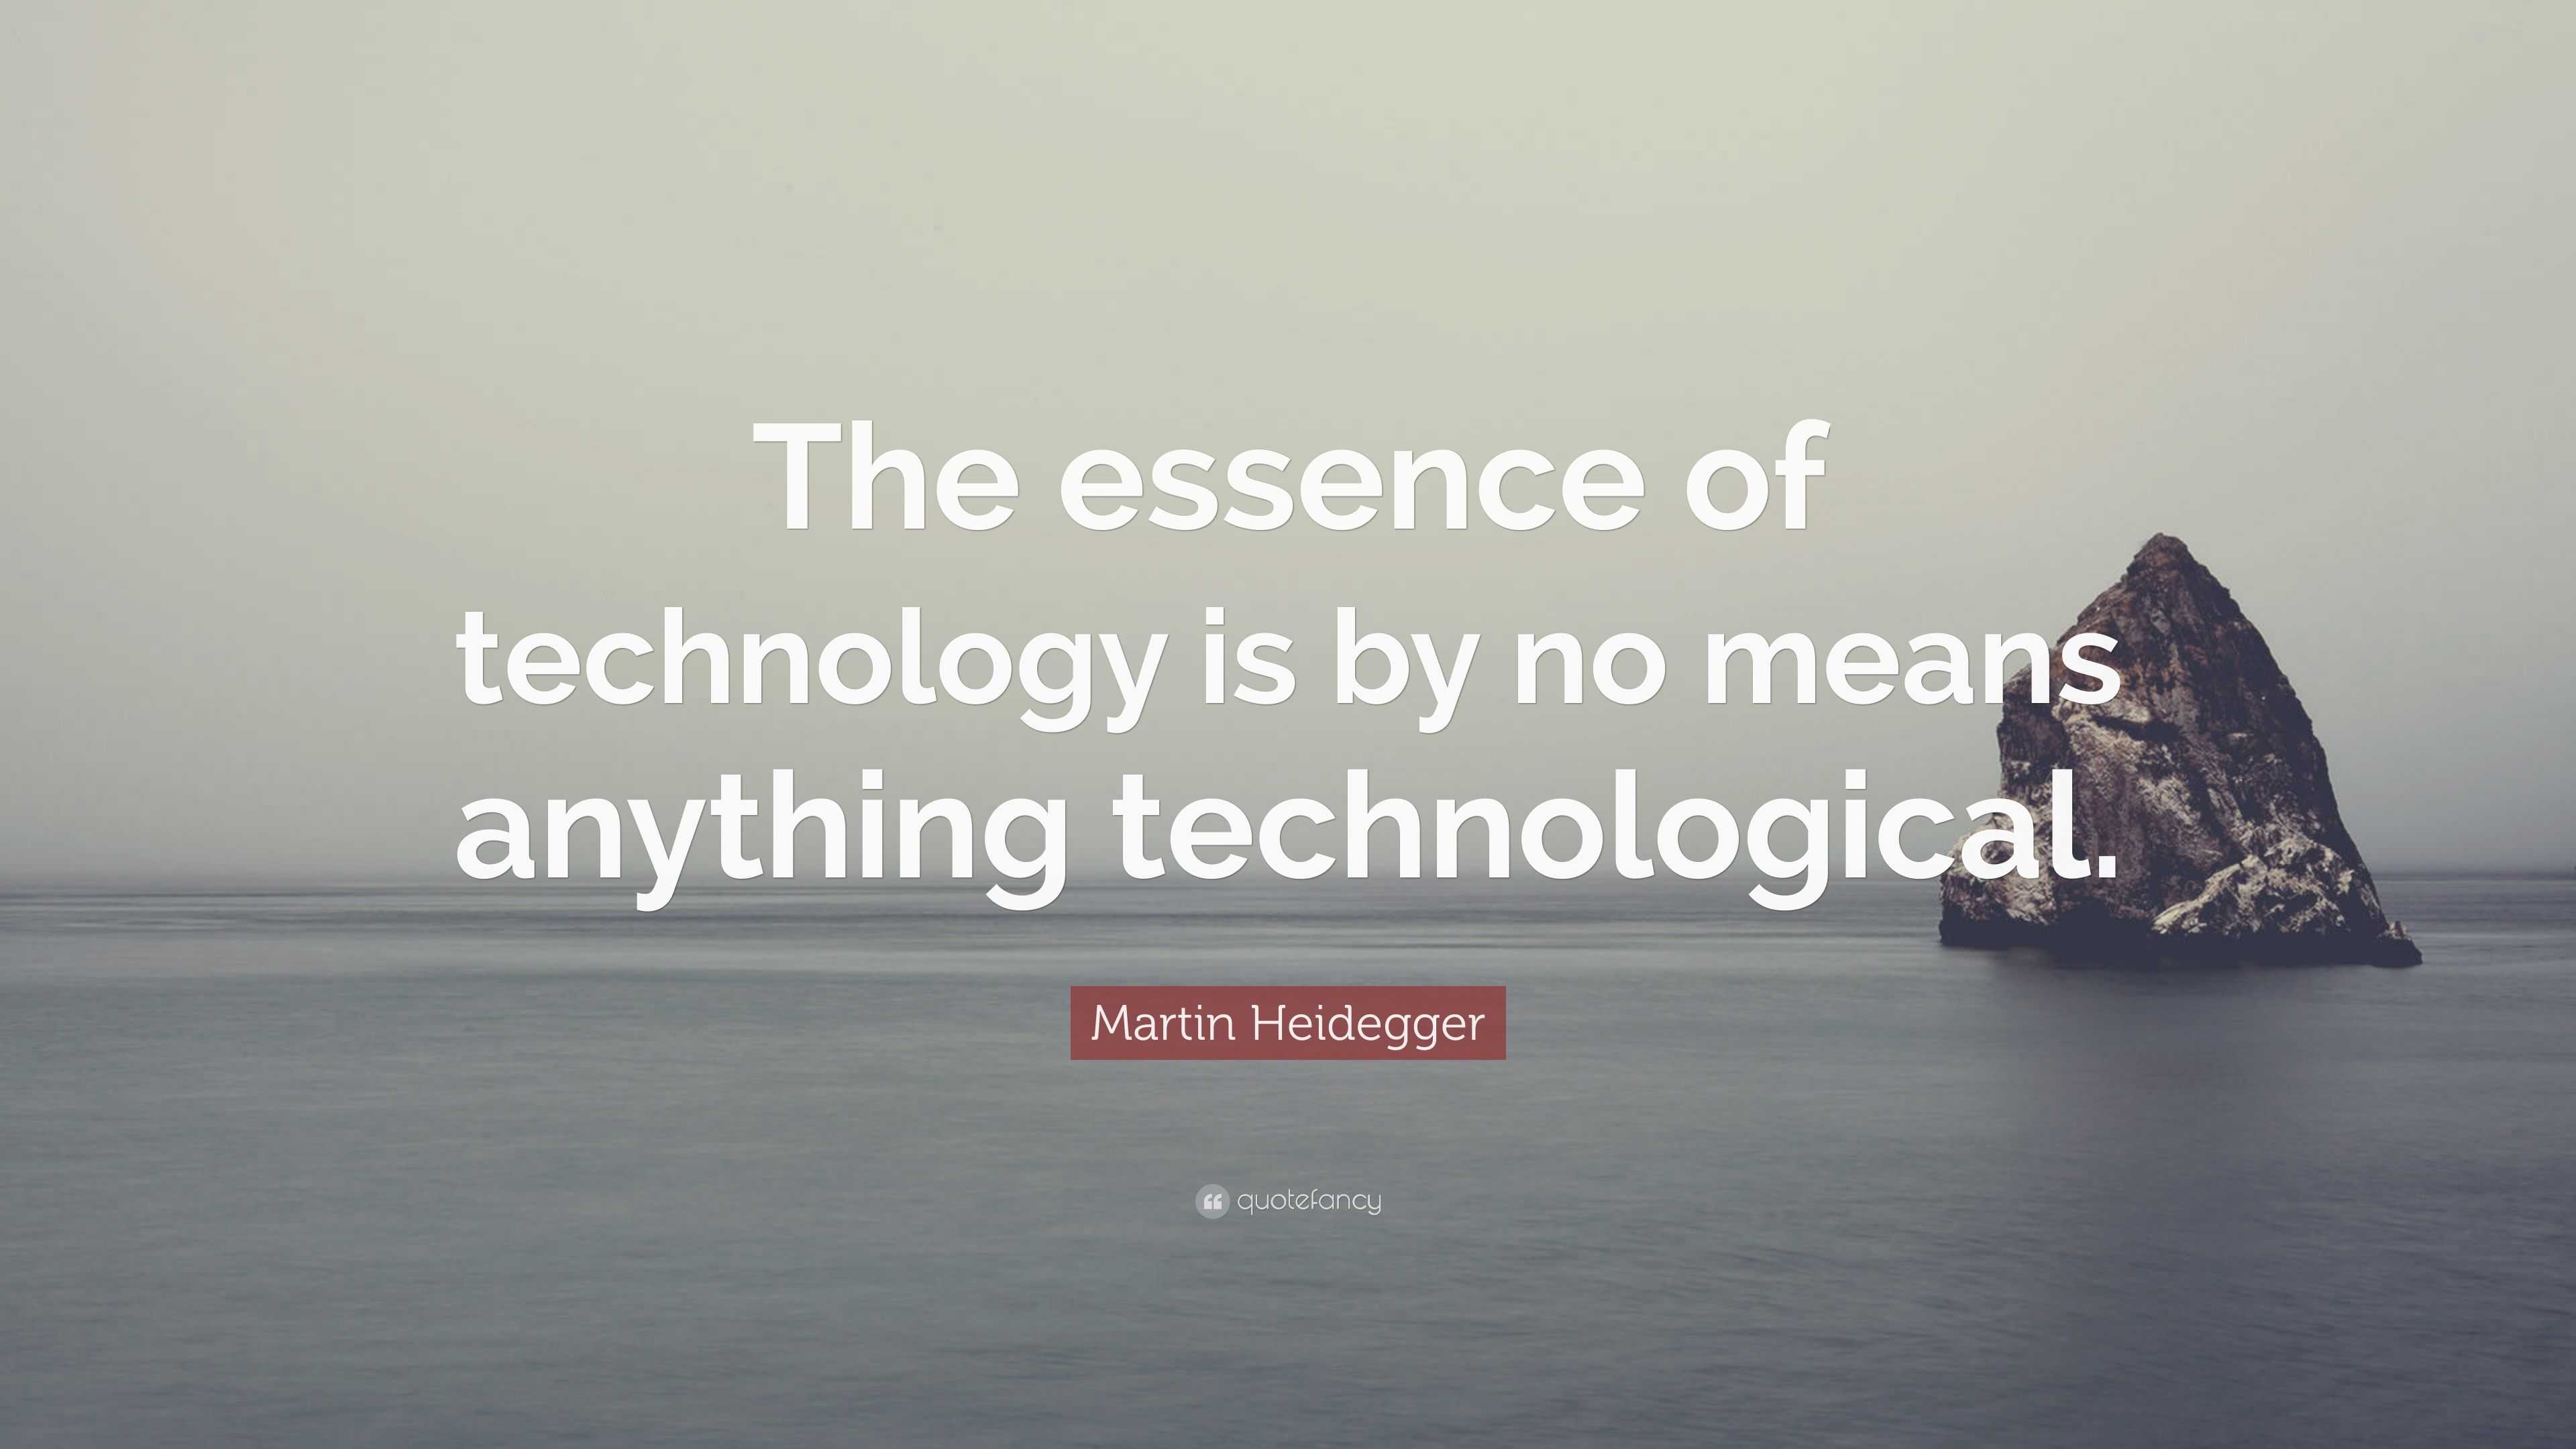 Martin Heidegger Quote: “The essence of technology is by no means ...